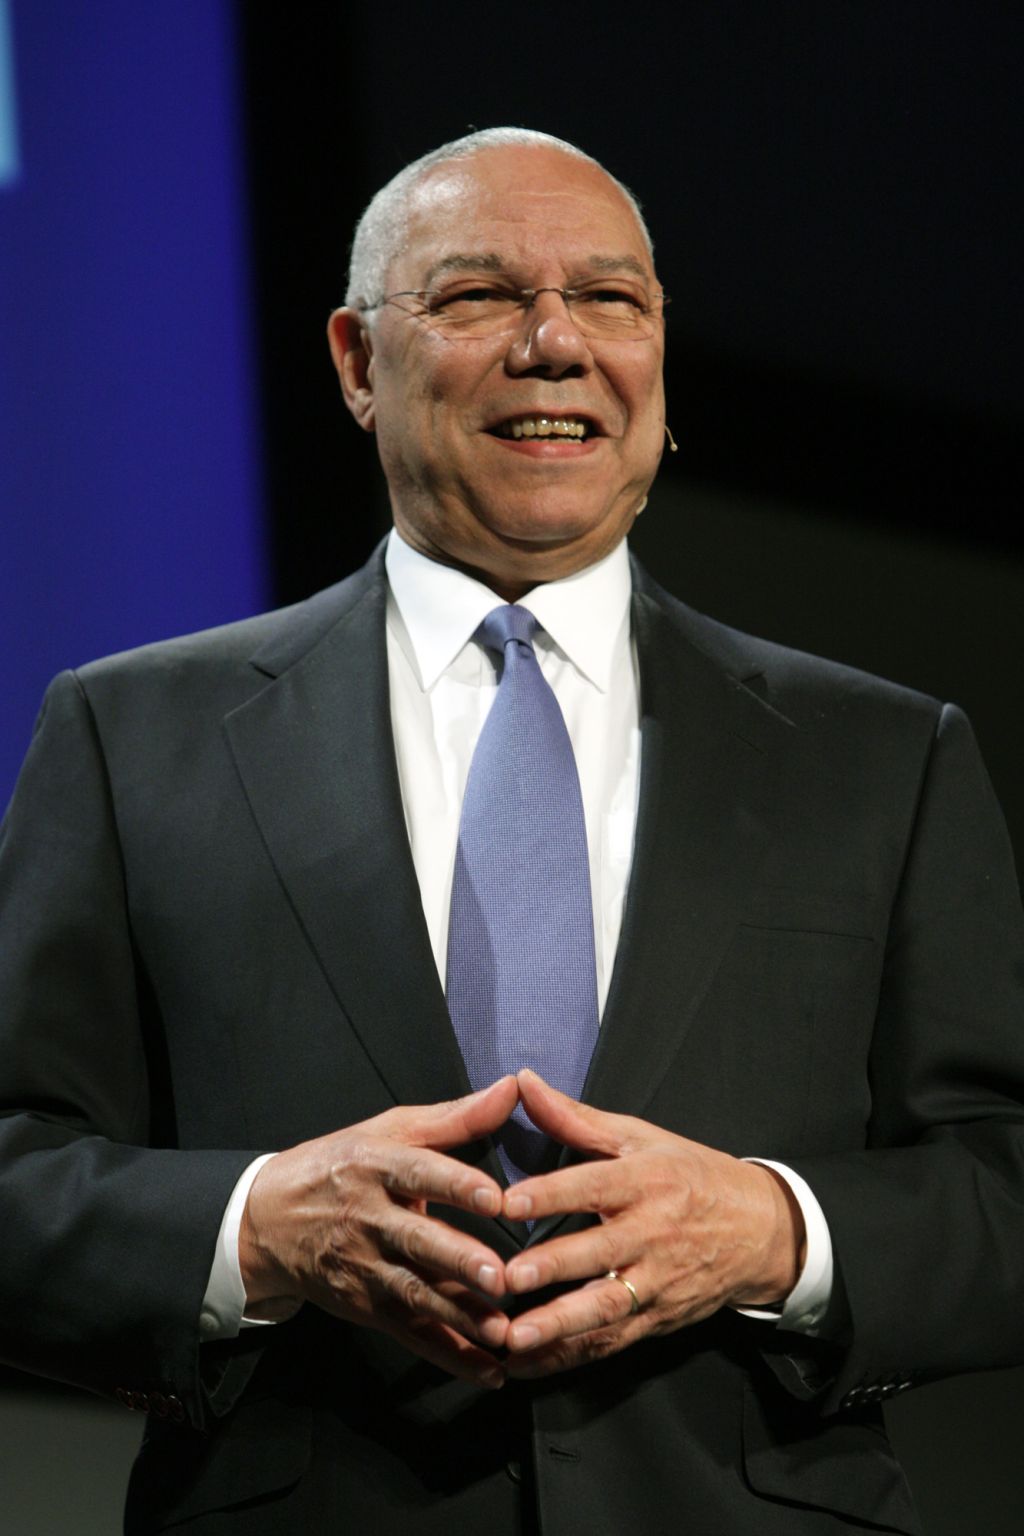 (051909 Boston, MA) Colin Powell talks to the audience during the Chamber's Centennial Celebration. Tuesday, May 19, 2009. Staff photo by John Wilcox.